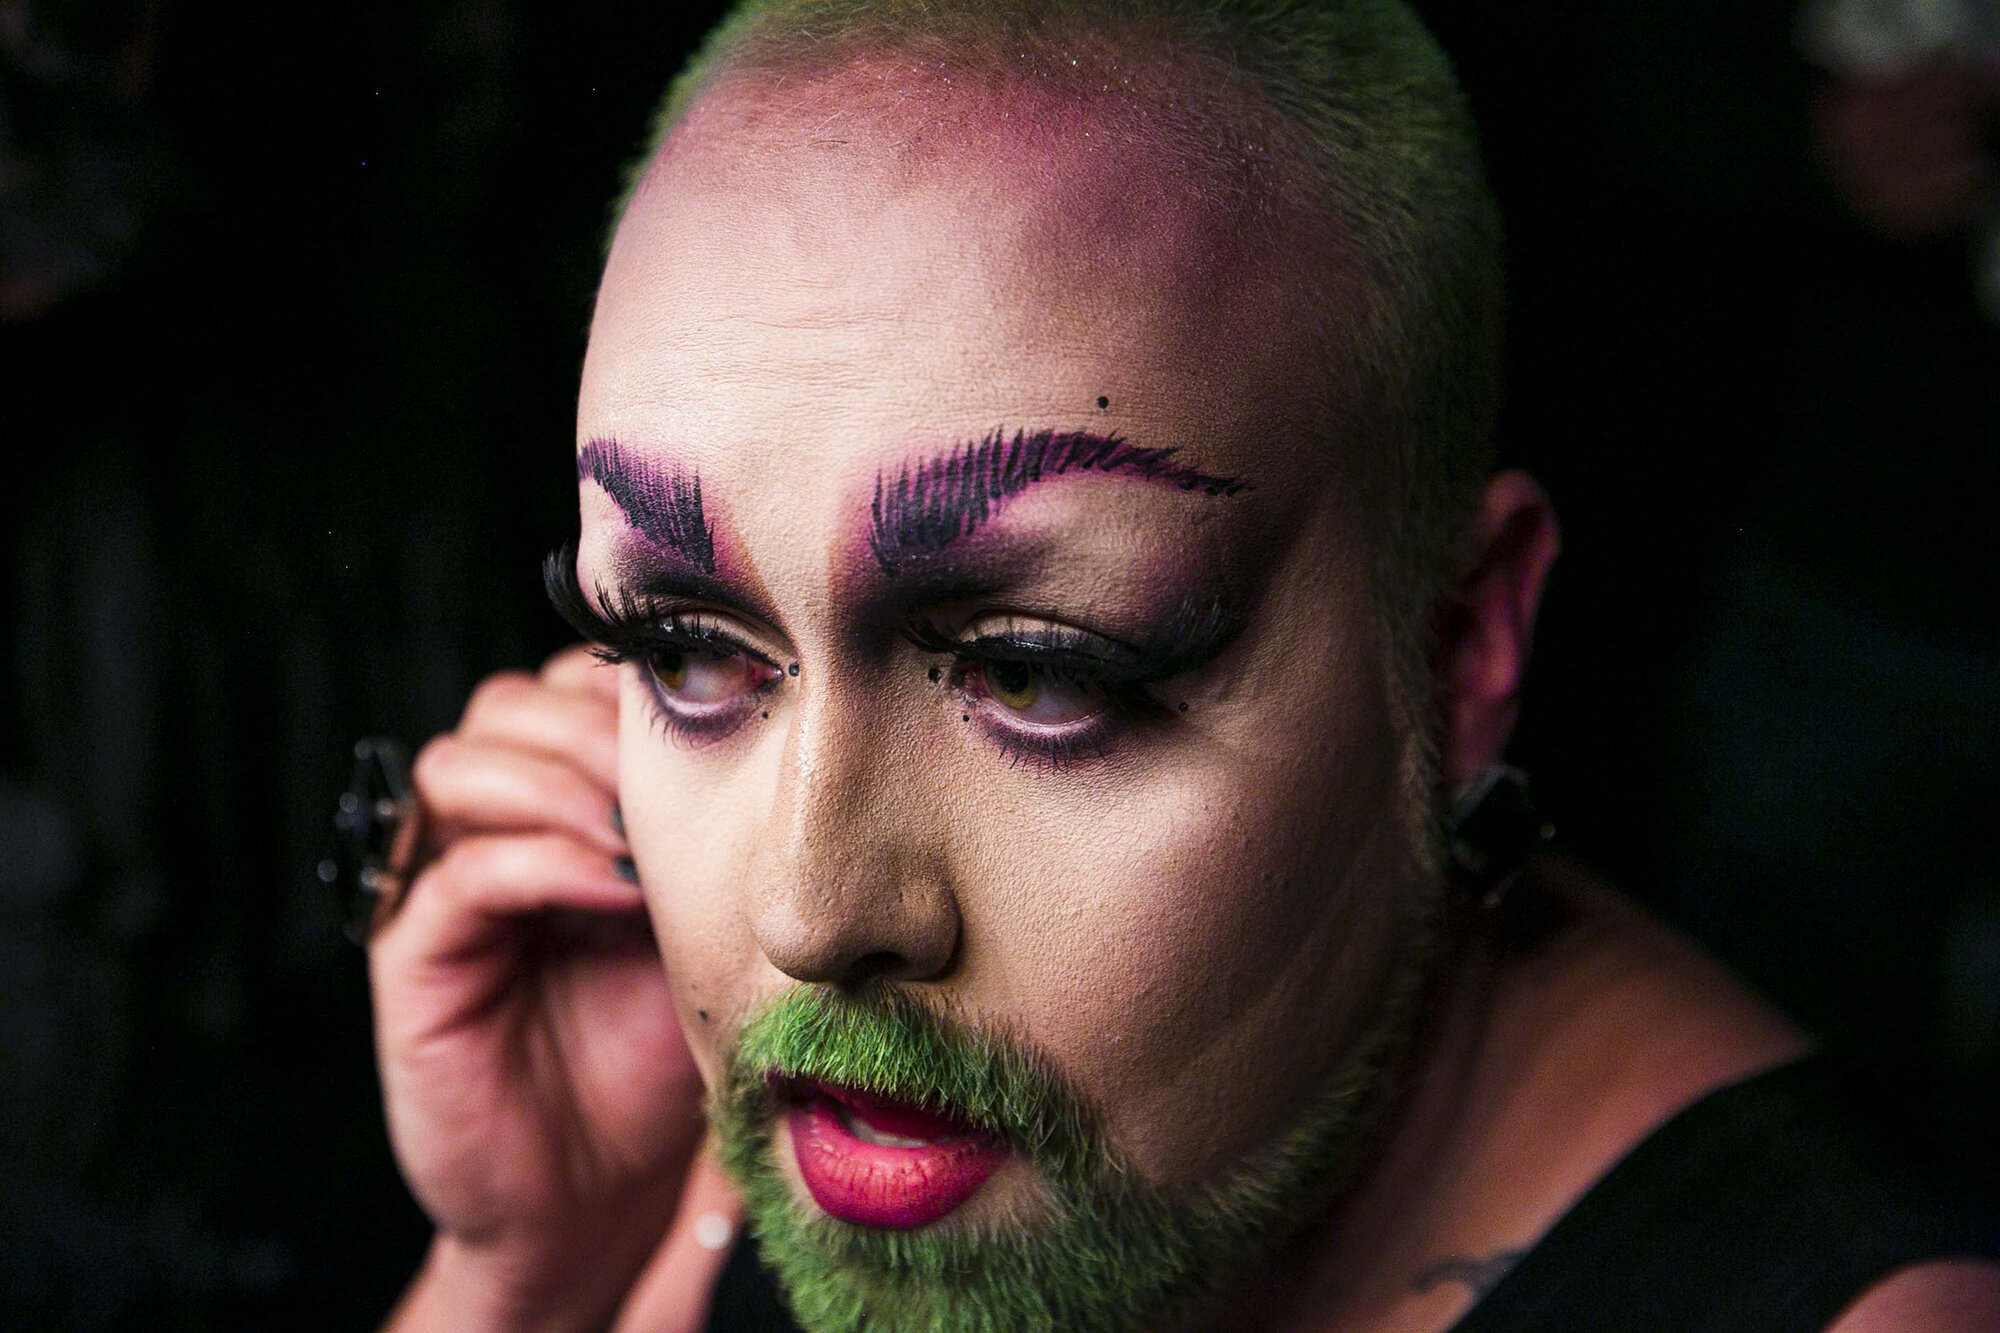  Robby, drag name, EmmaSis, prepares to take the stage during drag fest in Austin, Tx. 